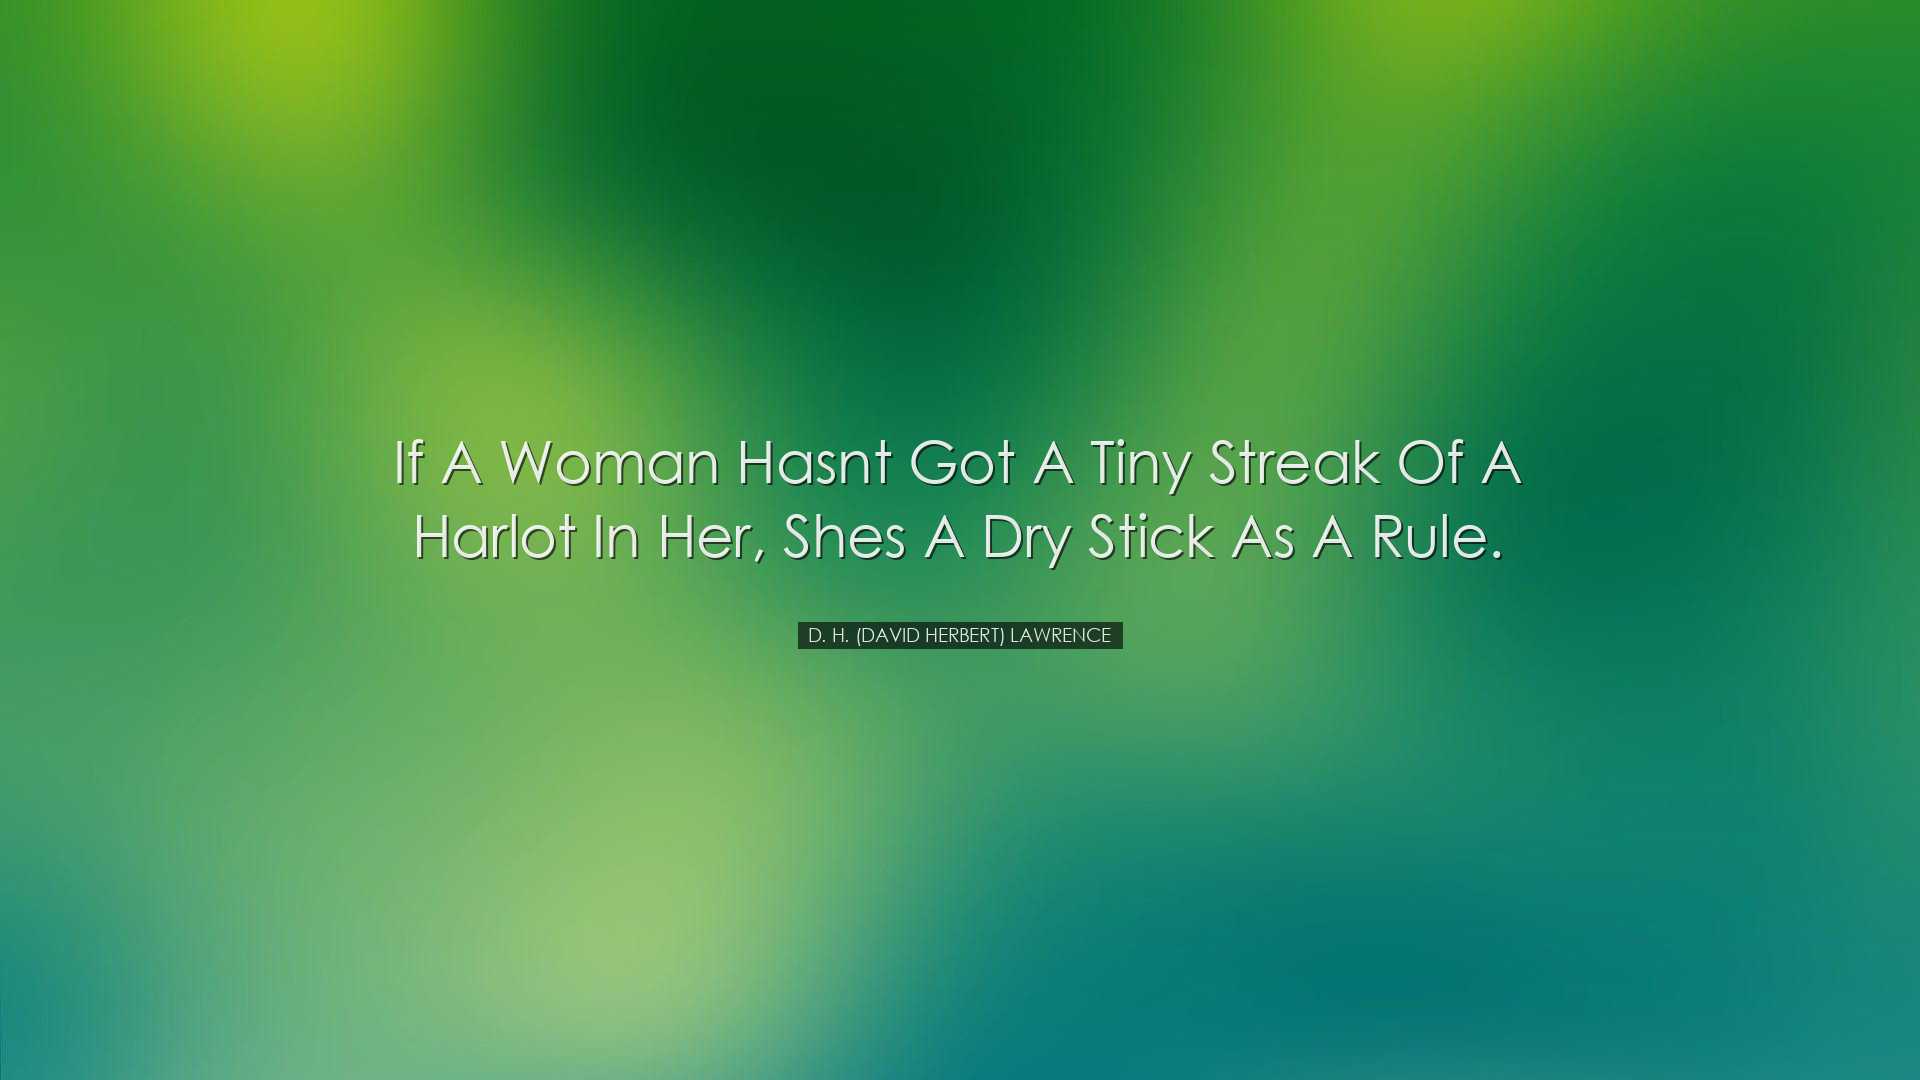 If a woman hasnt got a tiny streak of a harlot in her, shes a dry